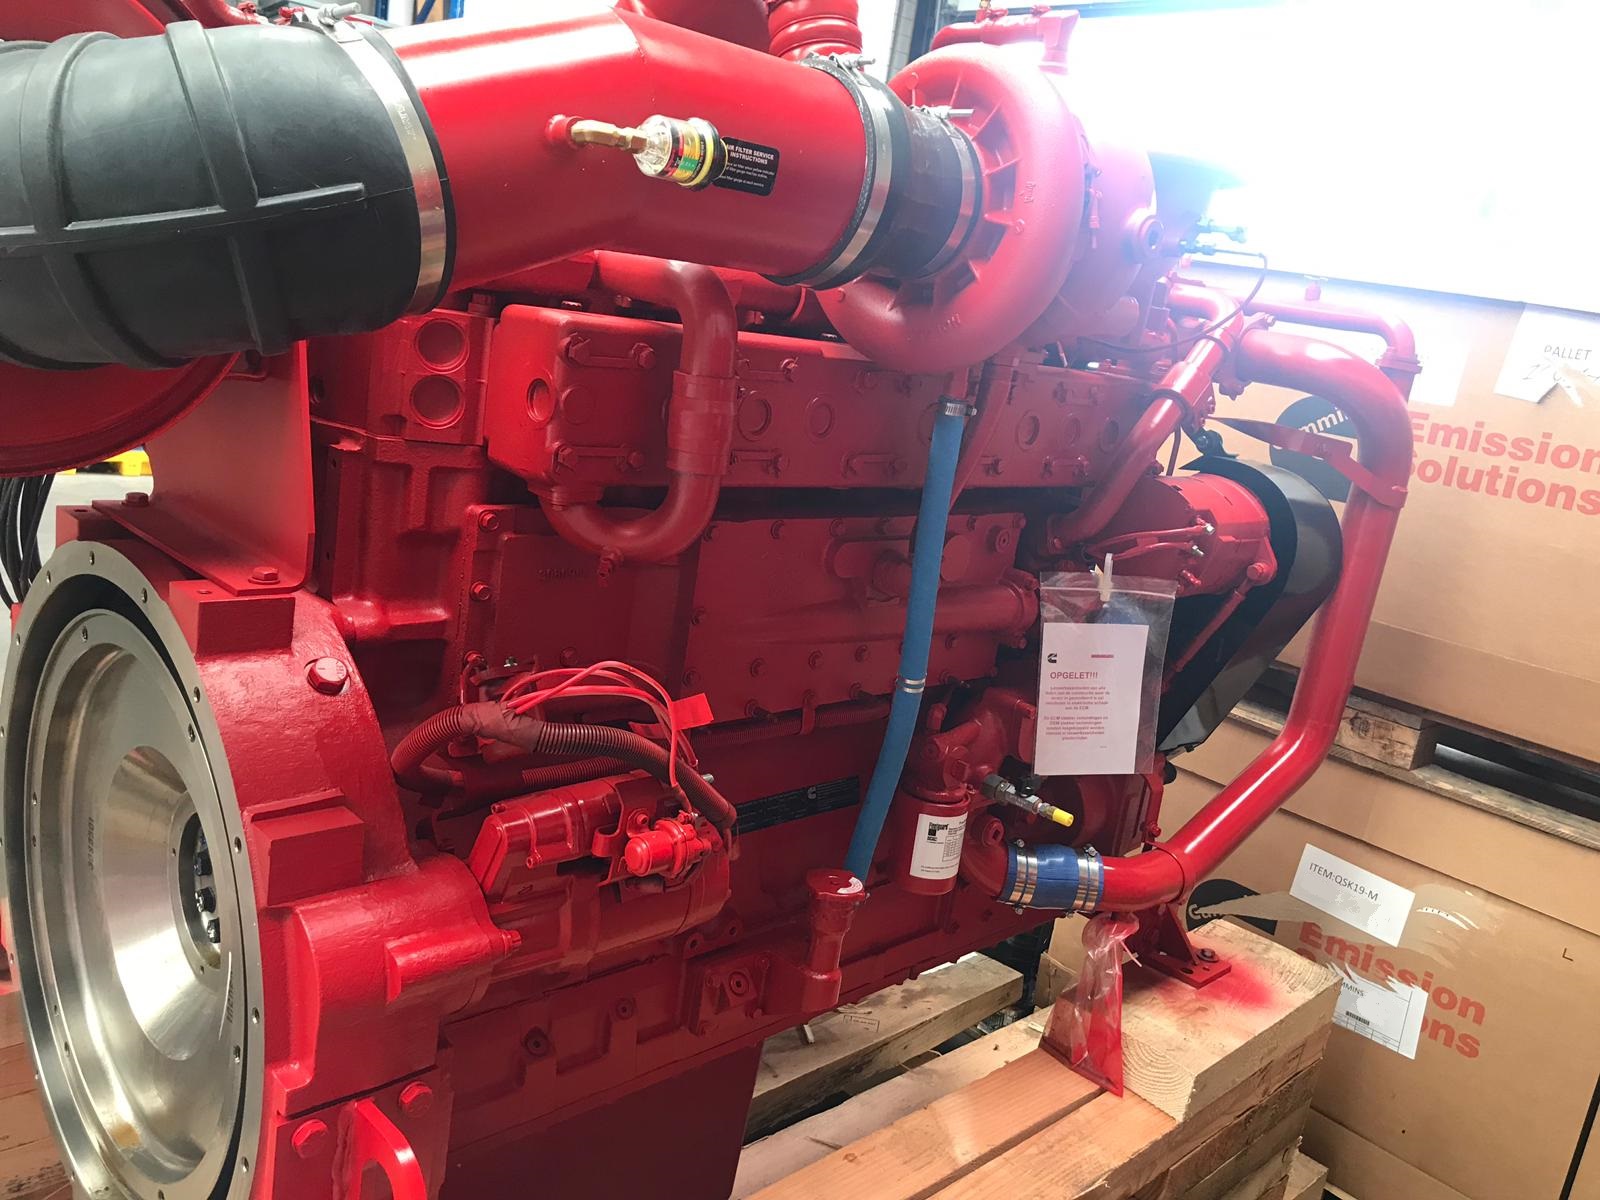 Cummins marine engine for sale cognizant rochester ny